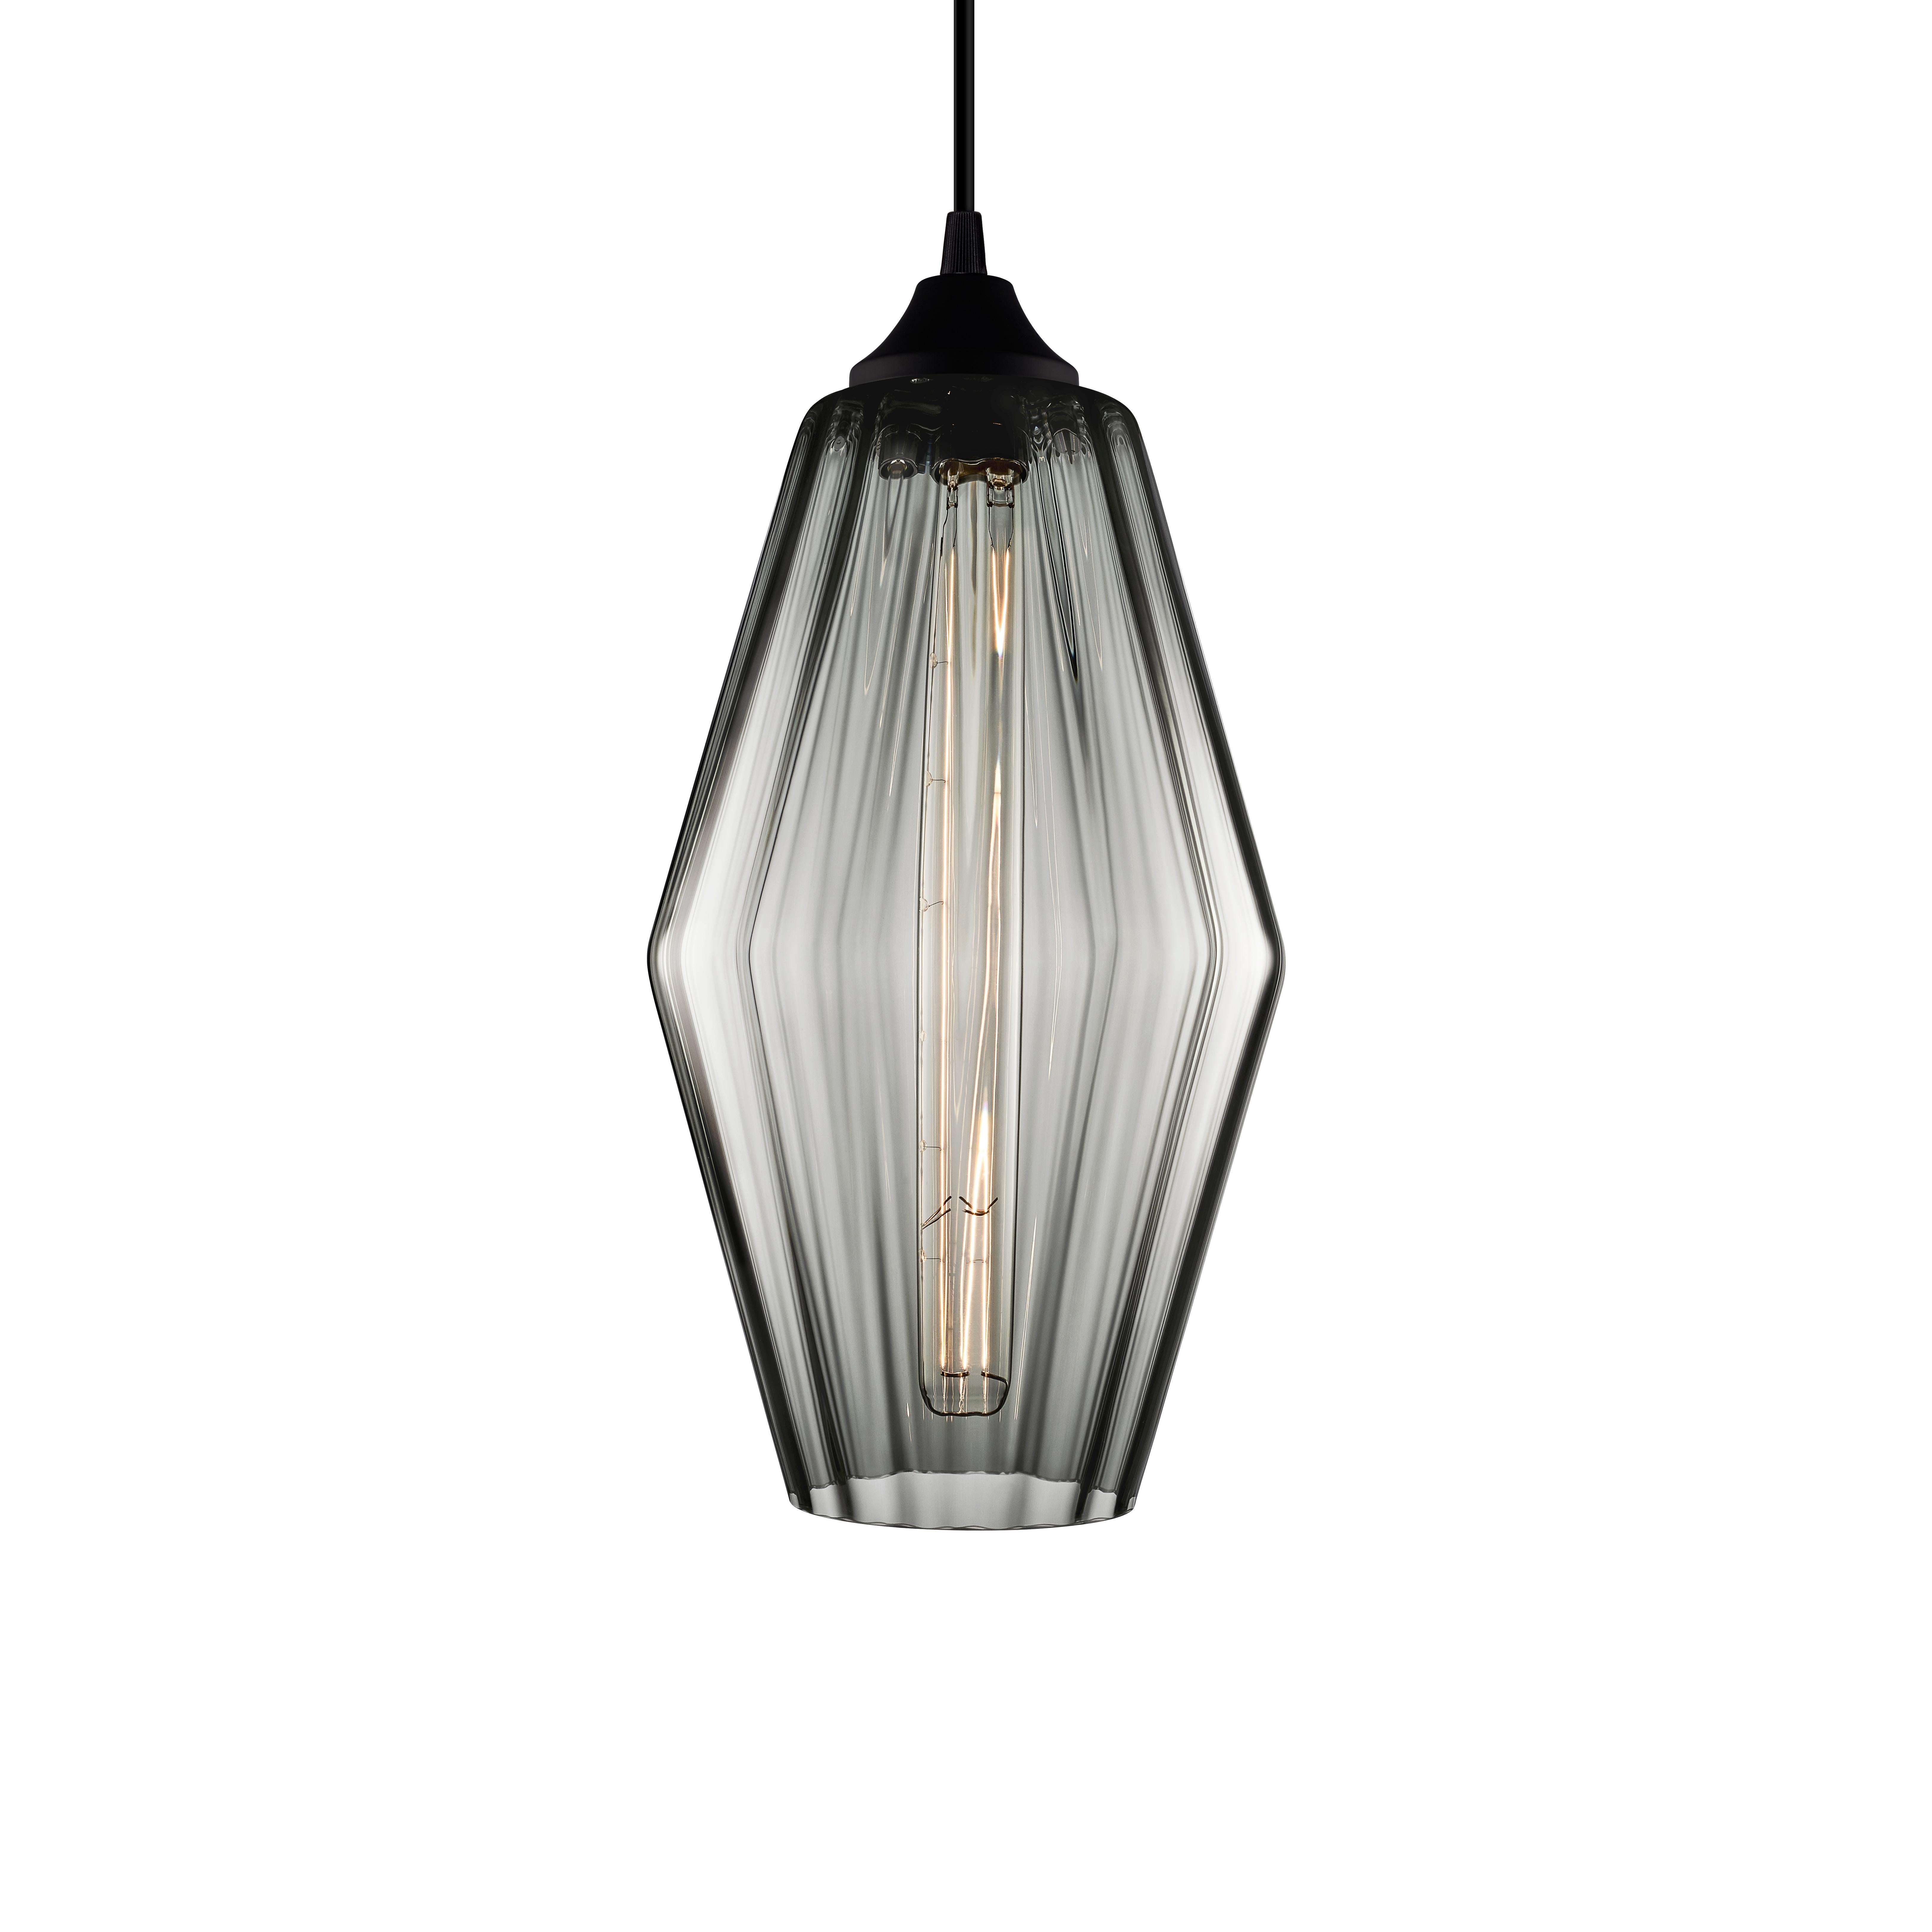 Marquise Condesa Handblown Modern Glass Pendant Light, Made in the USA In New Condition For Sale In Beacon, NY